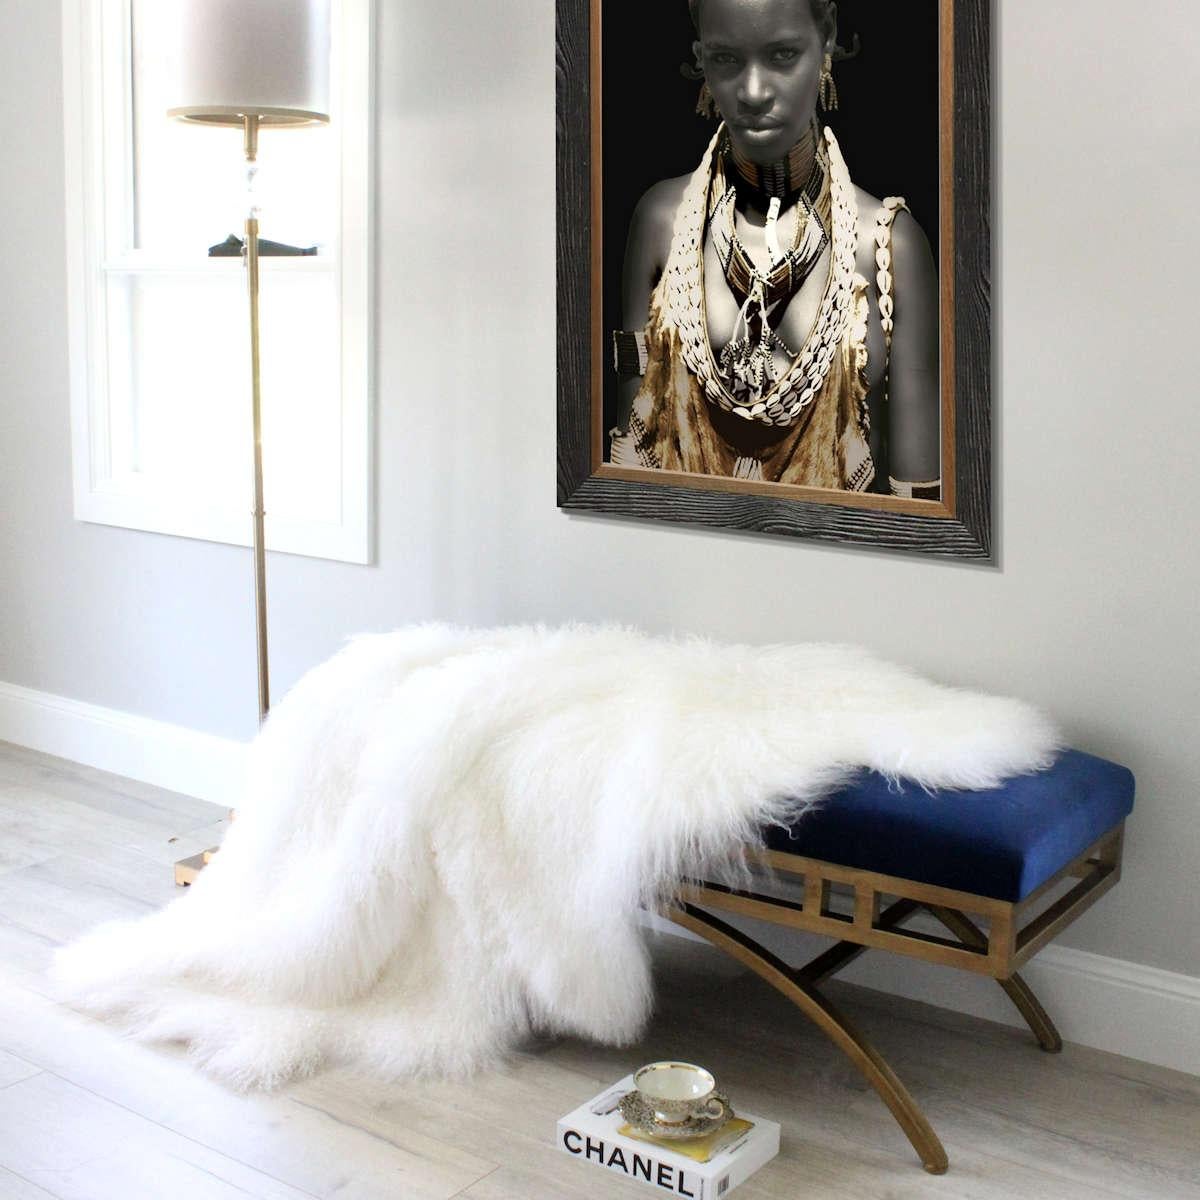 Add luxurious natural textures to a decor with this White Mongolian Fur Throw rug. Whether styling a sofa or adding glam to a wardrobe or nursery floors, this exquisite fur will elevate the elegance and luxe giving you the versatility in styling as